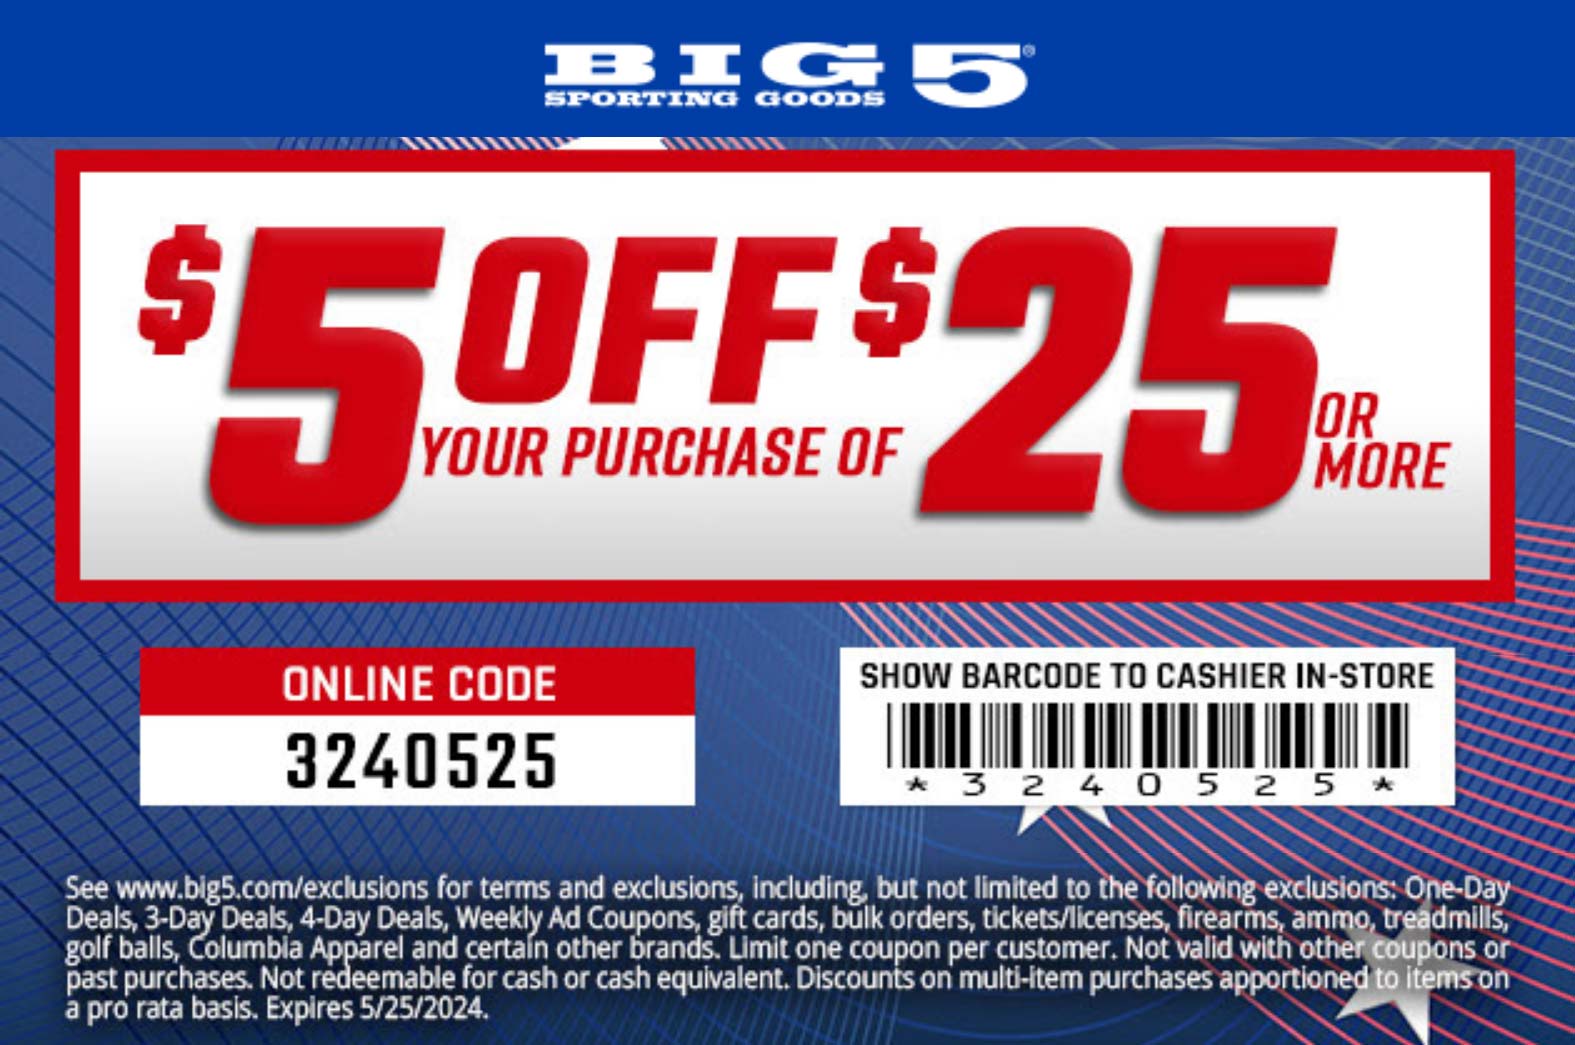 Big 5 stores Coupon  $5 off $25 today at Big 5 sporting goods, or online via promo code 3240525 #big5 